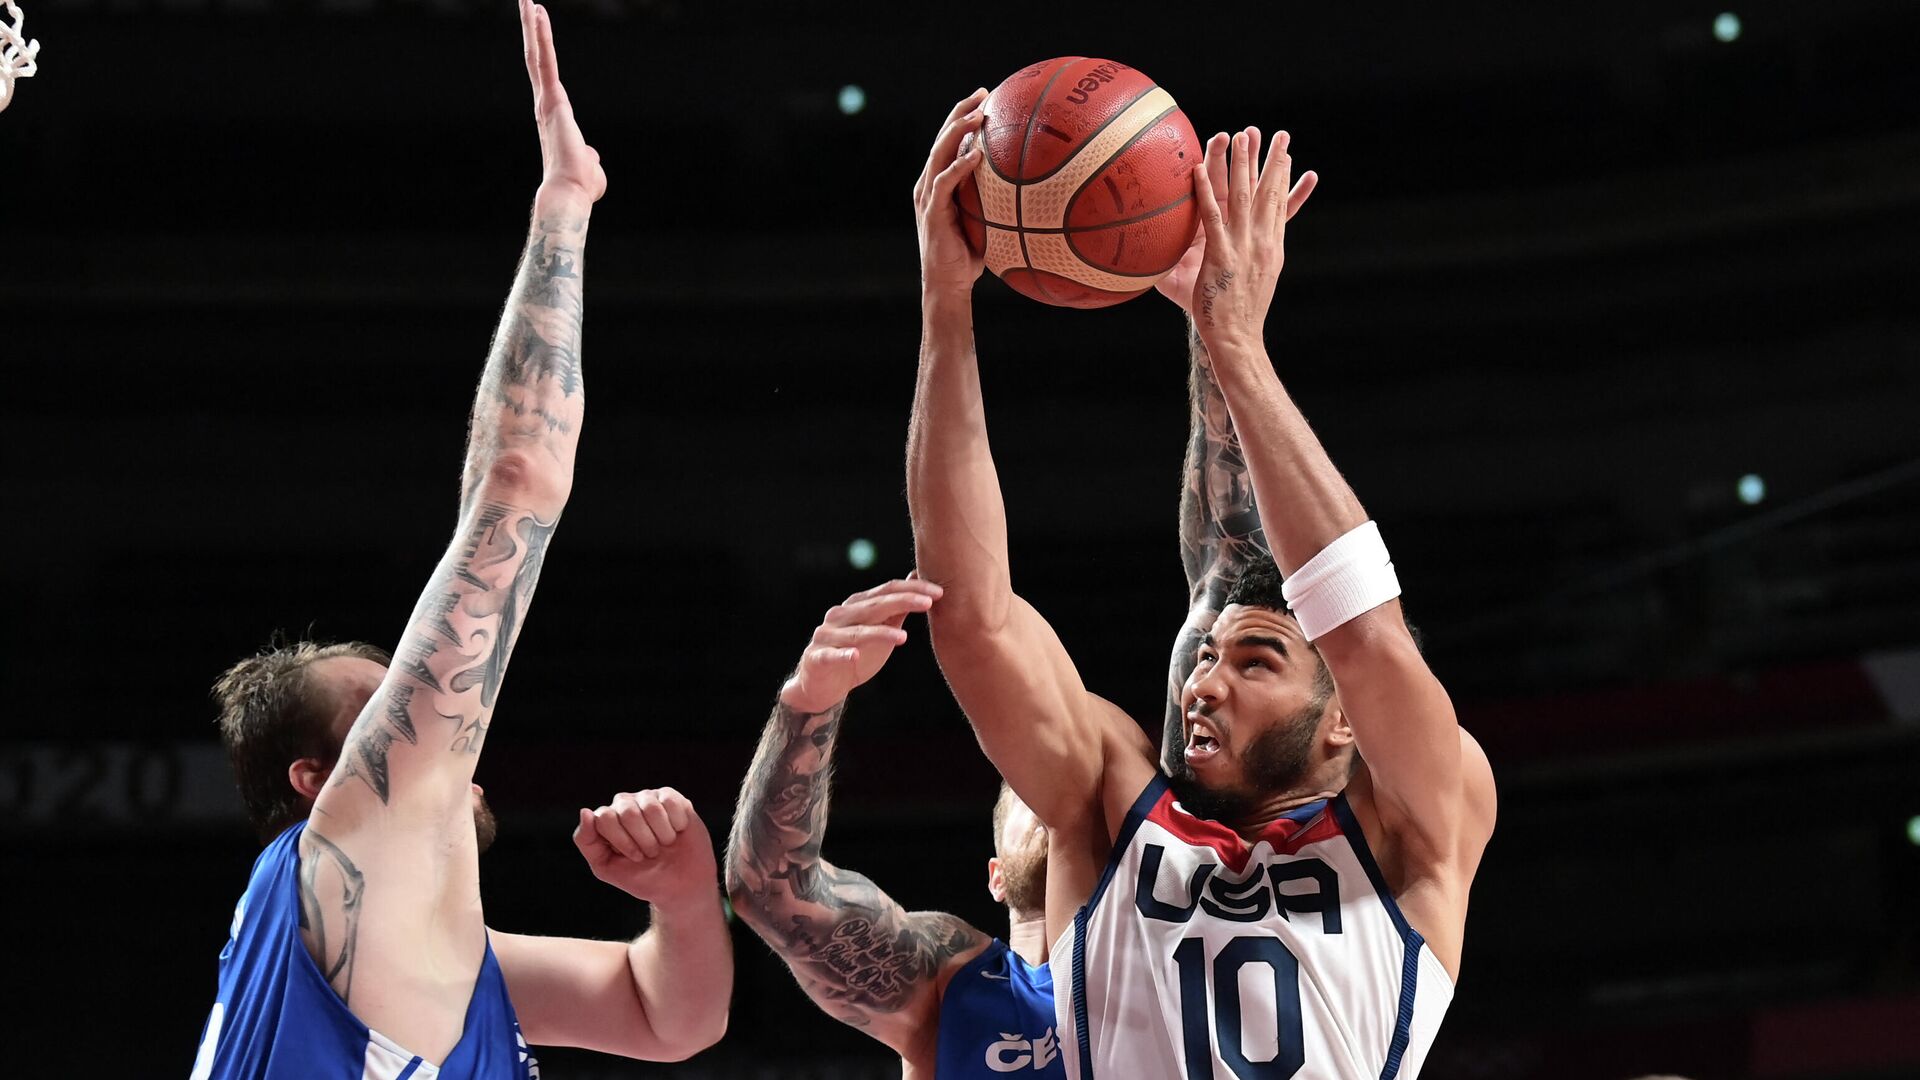 USA's Jayson Tatum (R) goes to the basket past Czech Republic's Ondrej Balvin (L) in the men's preliminary round group A basketball match between USA and Czech Republic during the Tokyo 2020 Olympic Games at the Saitama Super Arena in Saitama on July 31, 2021. (Photo by Aris MESSINIS / AFP) - РИА Новости, 1920, 31.07.2021